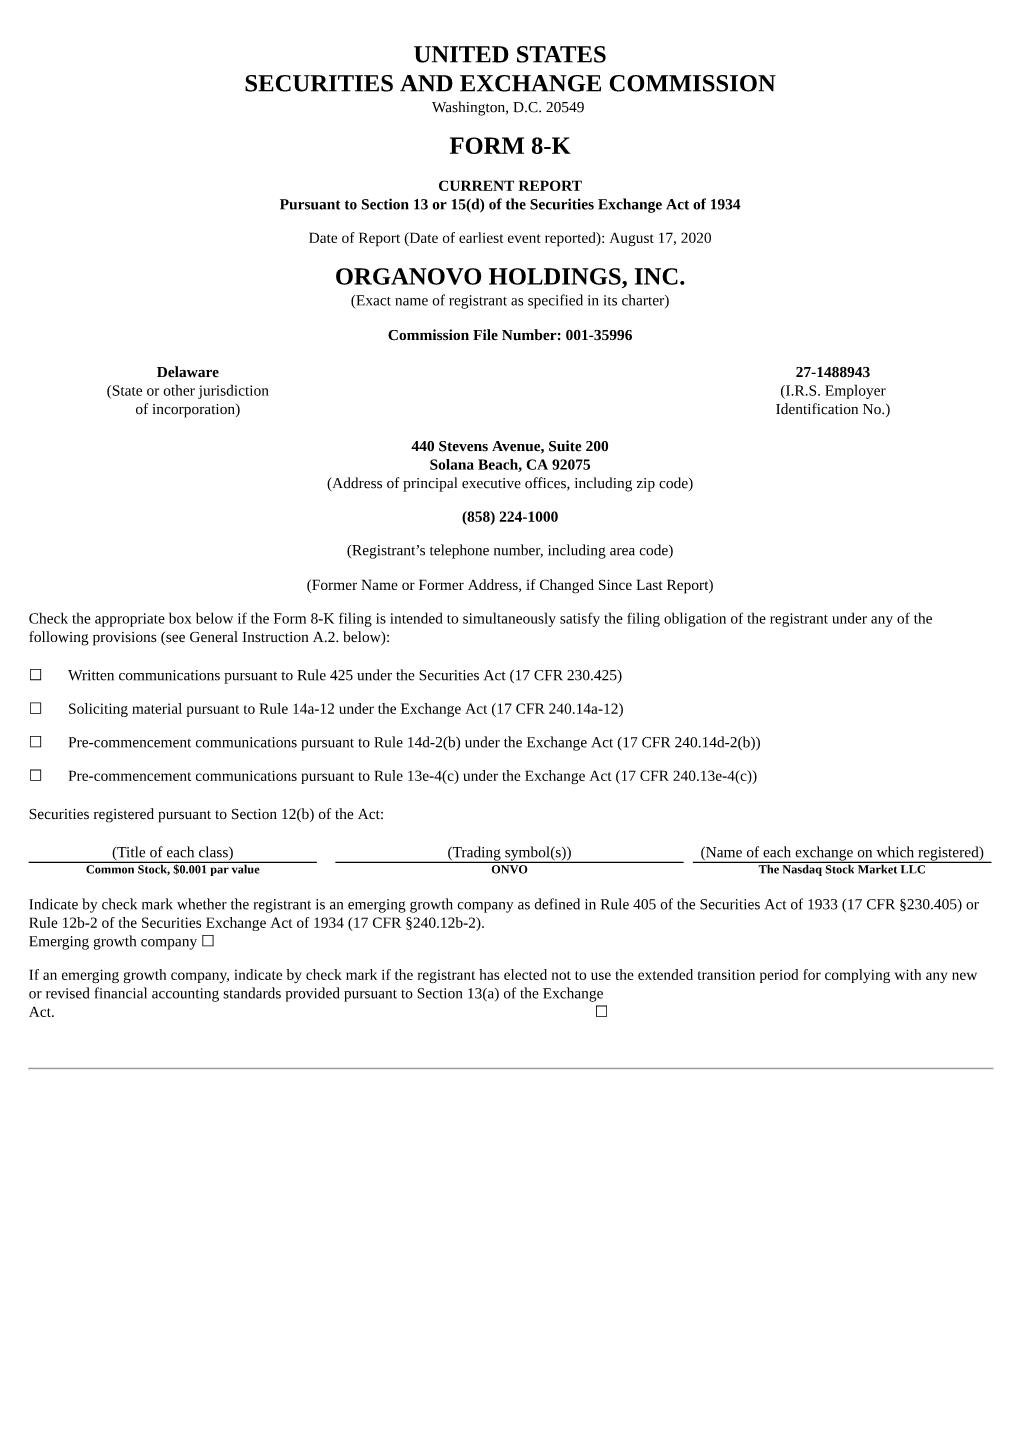 United States Securities and Exchange Commission Form 8-K Organovo Holdings, Inc